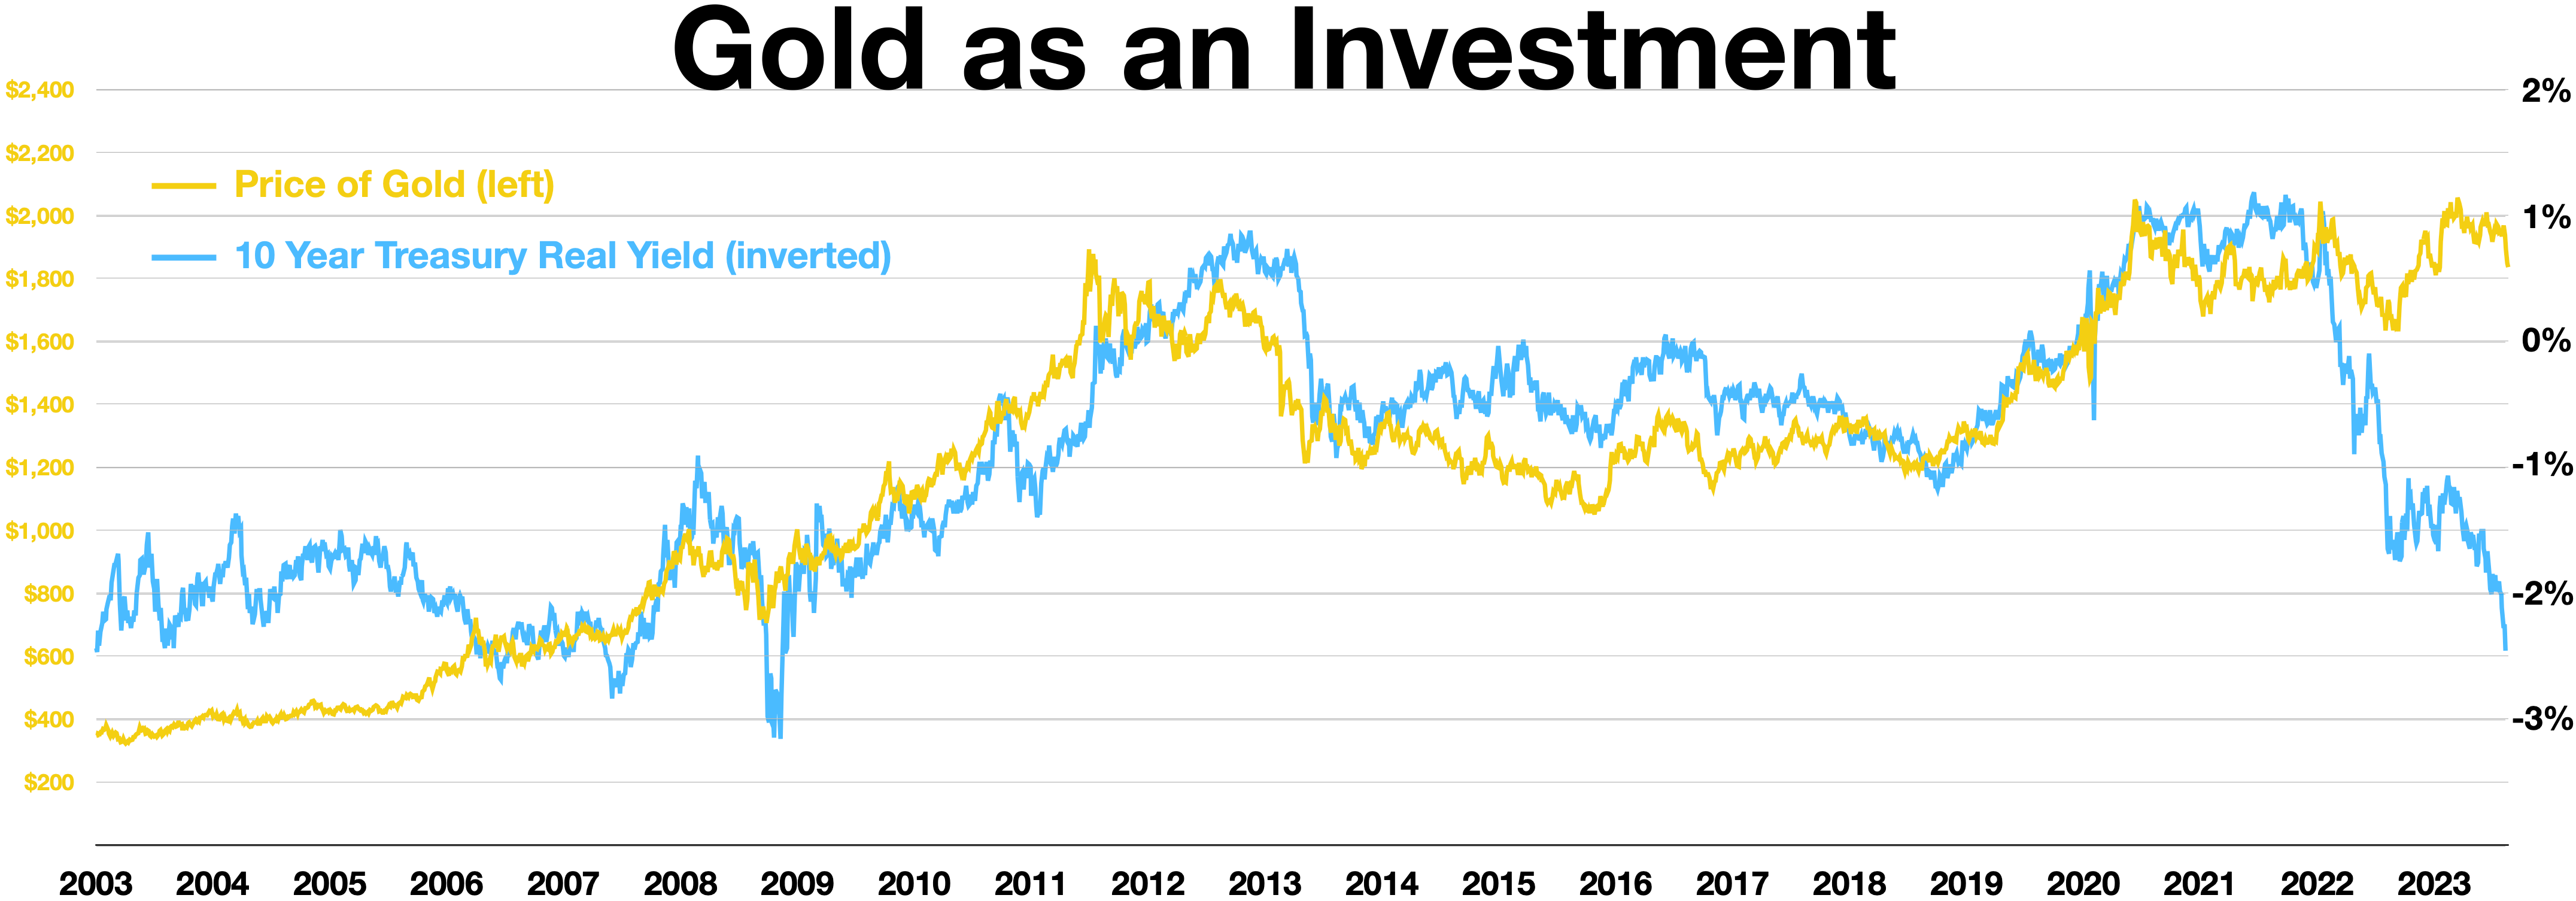 File:Gold as an investment.webp - Wikipedia